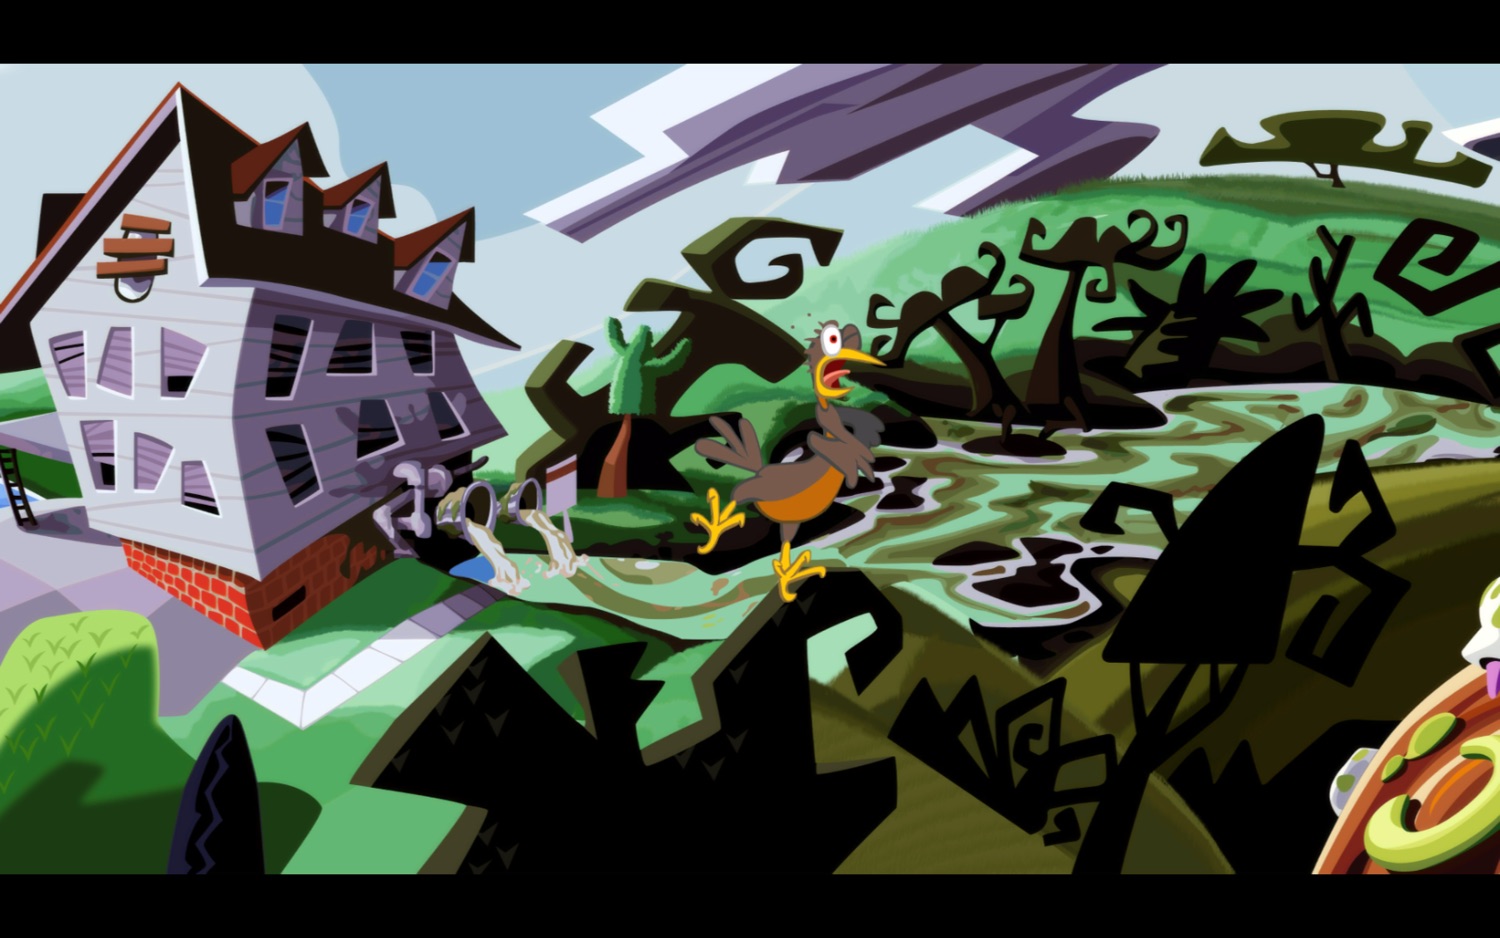 Screenshot from Day of the Tentacle, showing the mansion. It's pumping galloons of horrible slime out into the countryside, polluting the waters and killing the foliage. There is a bird choking.